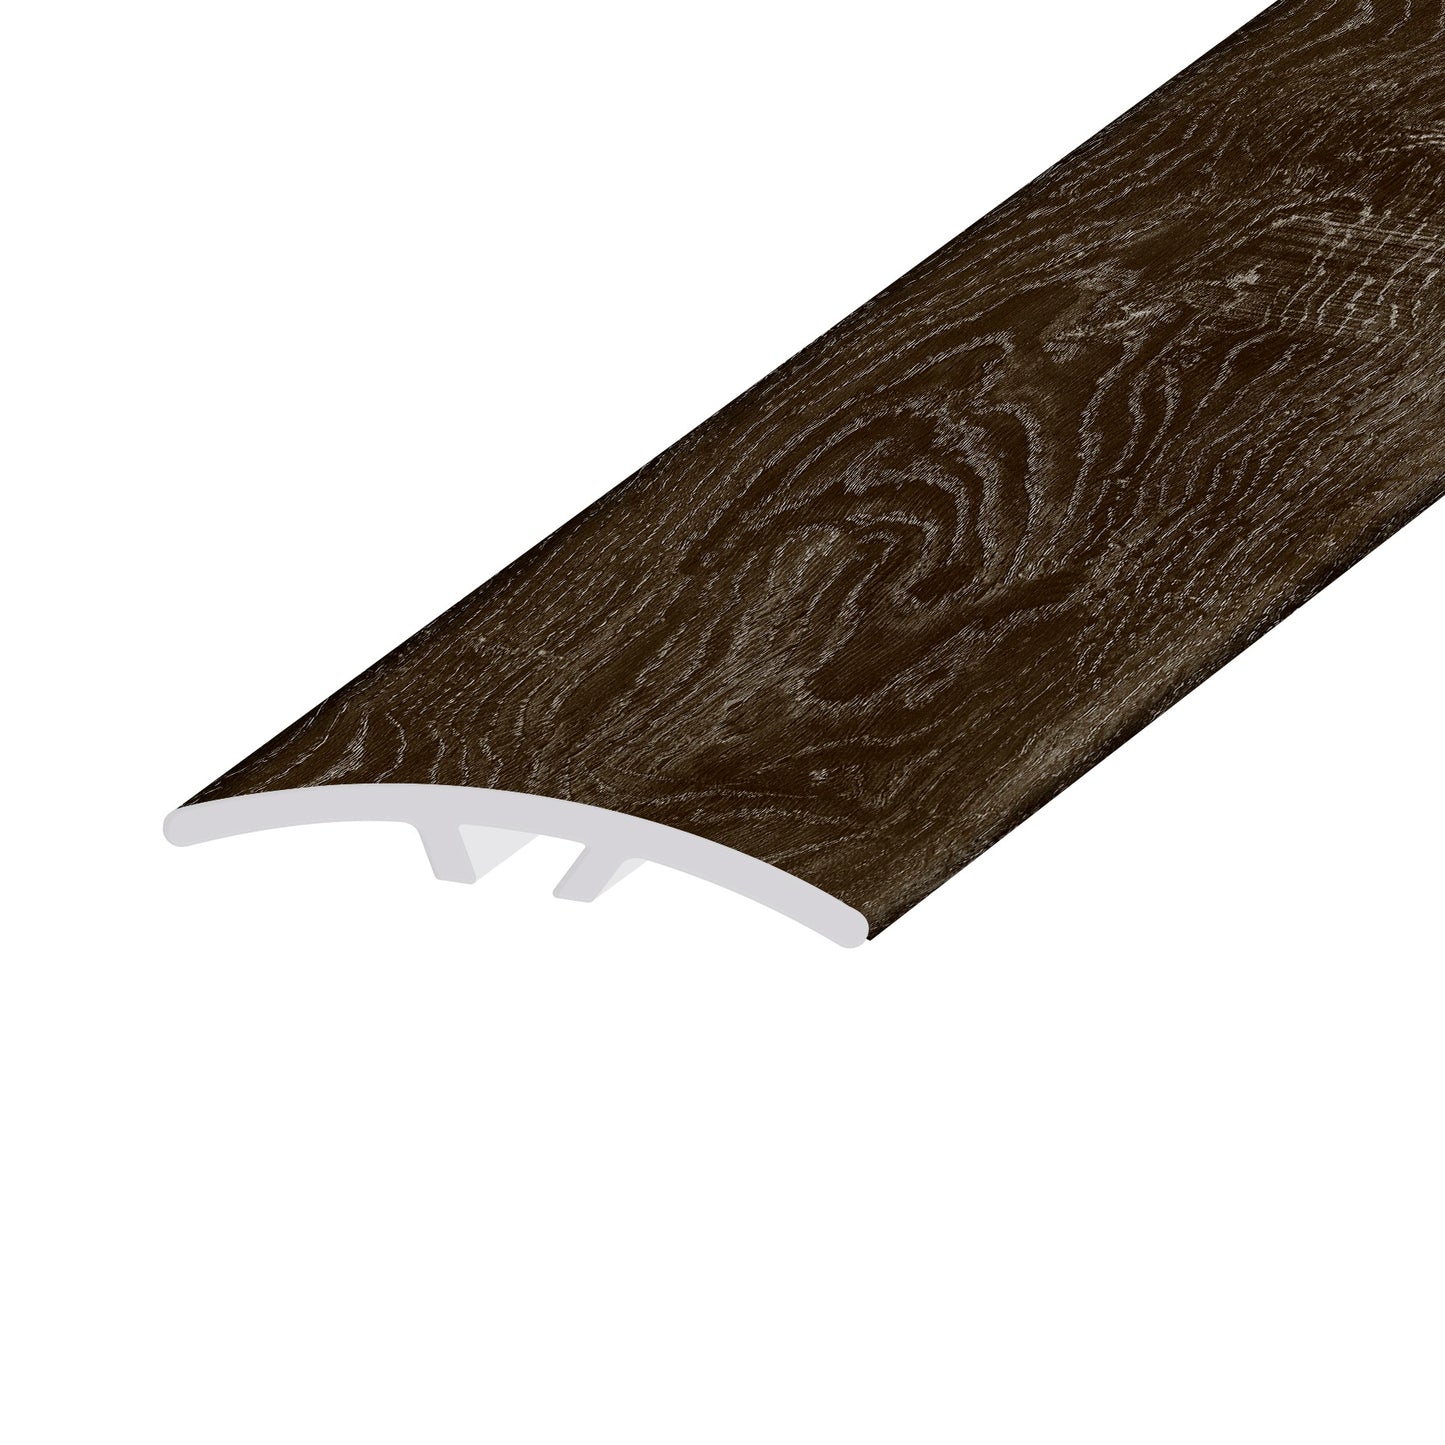 Frosted Oak 0.23 in. Thich x 1.59 in. Width x 94 in. Length Vinyl Multi-Purpose Reducer Molding